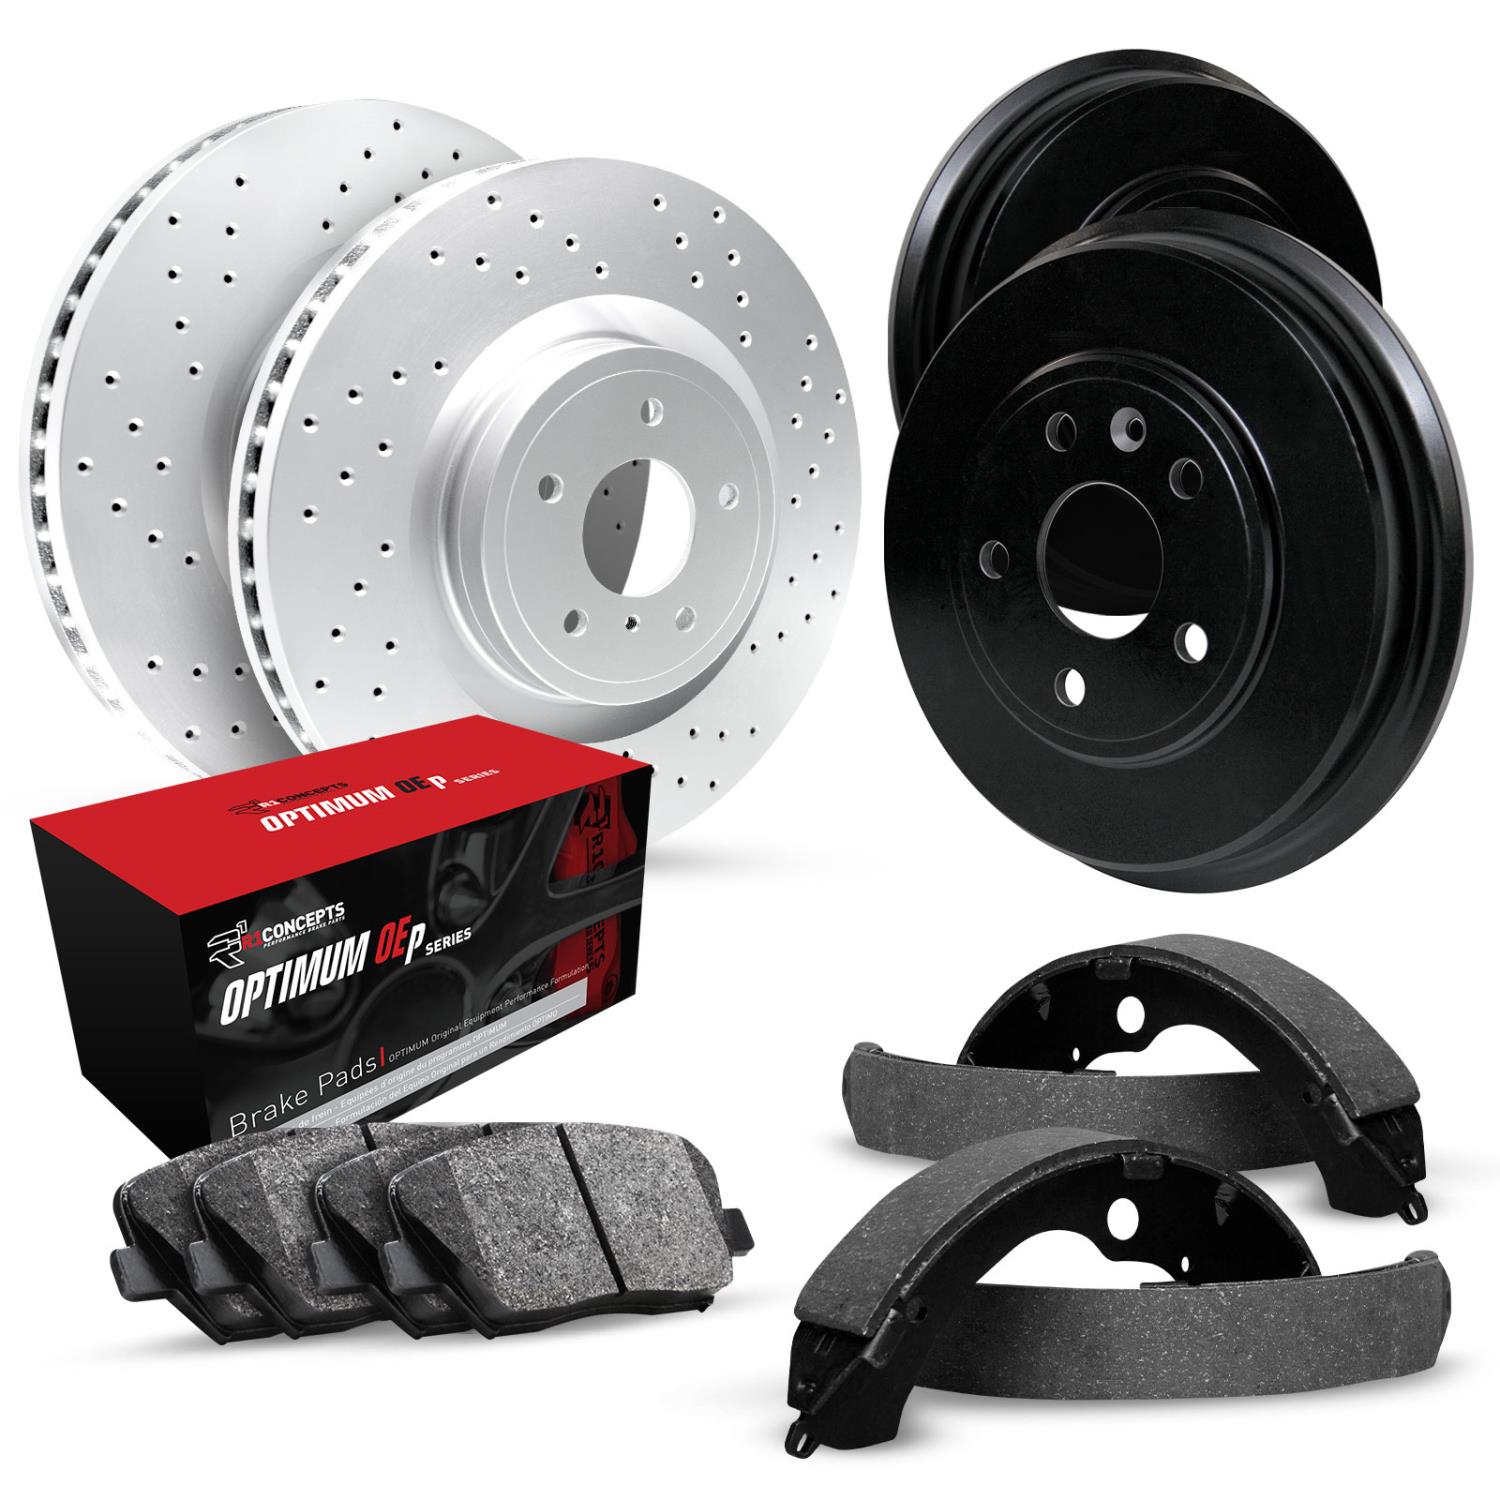 GEO-Carbon Drilled Brake Rotor & Drum Set w/Optimum OE Pads & Shoes, 1972-1973 GM, Position: Front & Rear